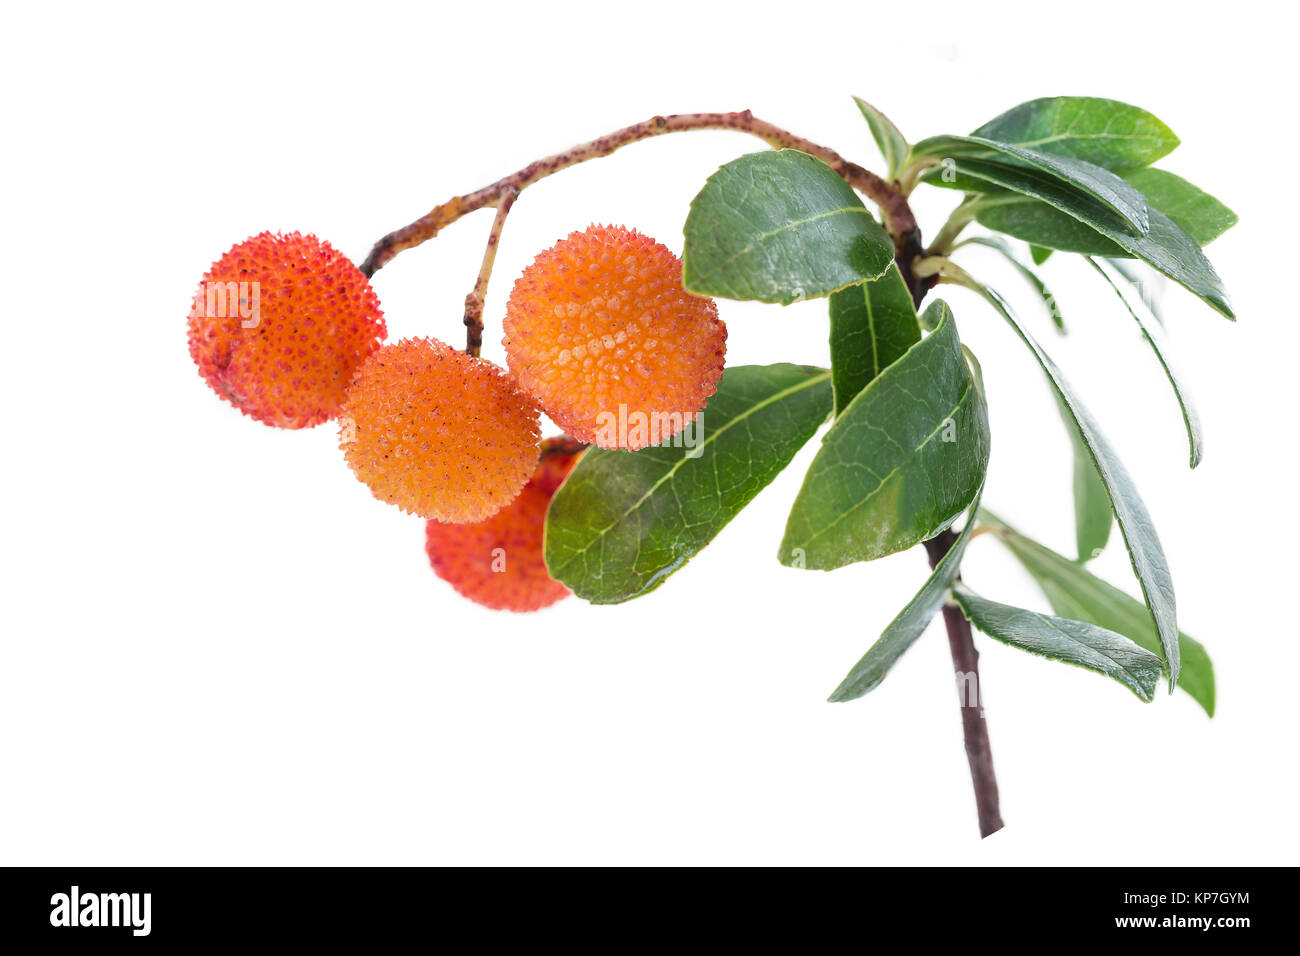 Arbutus branch and very ripe orange fruit on a white background Stock Photo